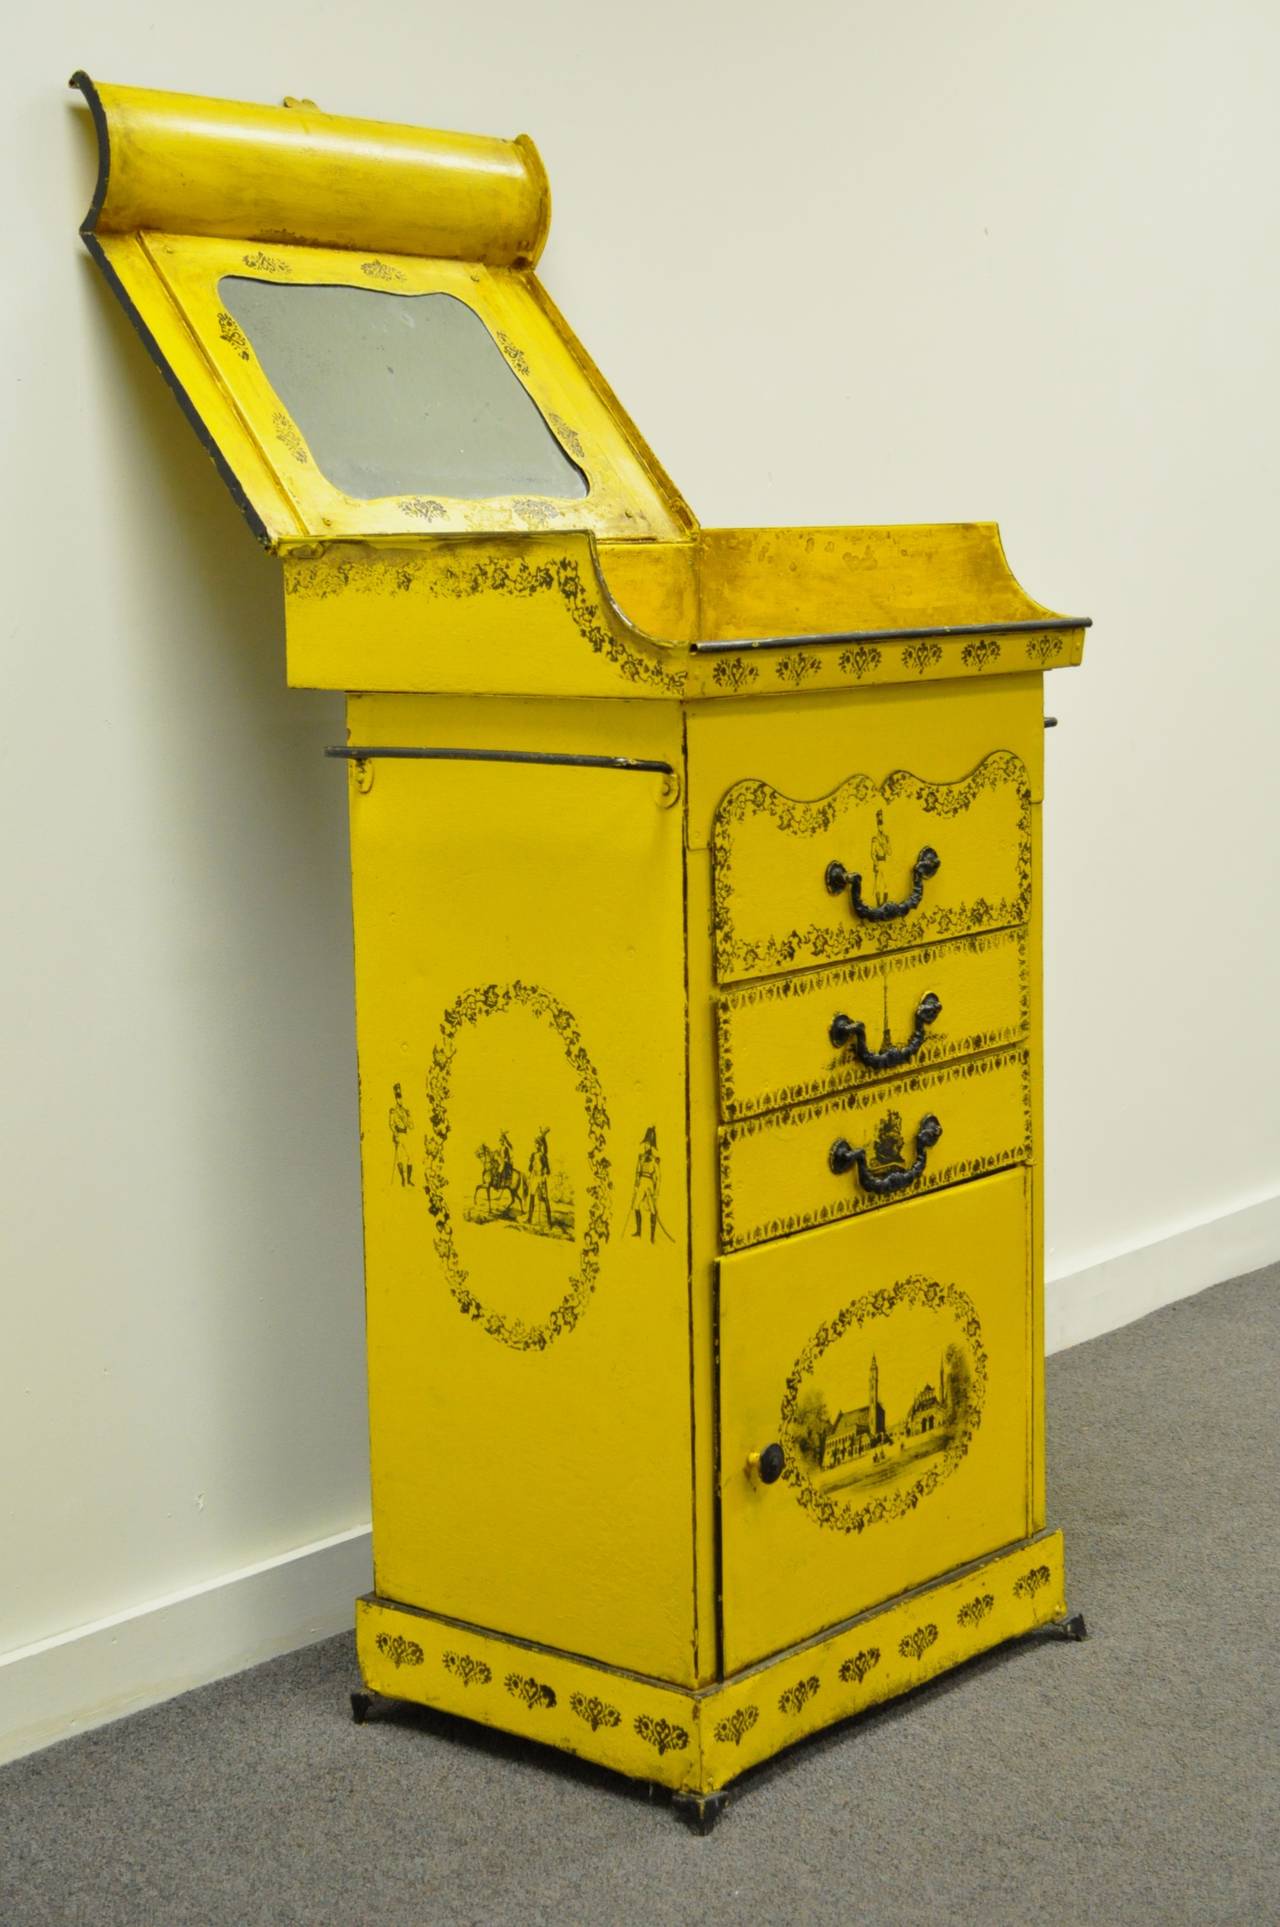 Italian 19th century French style painted tole metal flip-top vanity washstand. Rectangular form, inset water basin with mirror, three drawers, and lower storage. Painted in yellow and decorated with decals of medallions and groups of soldiers,